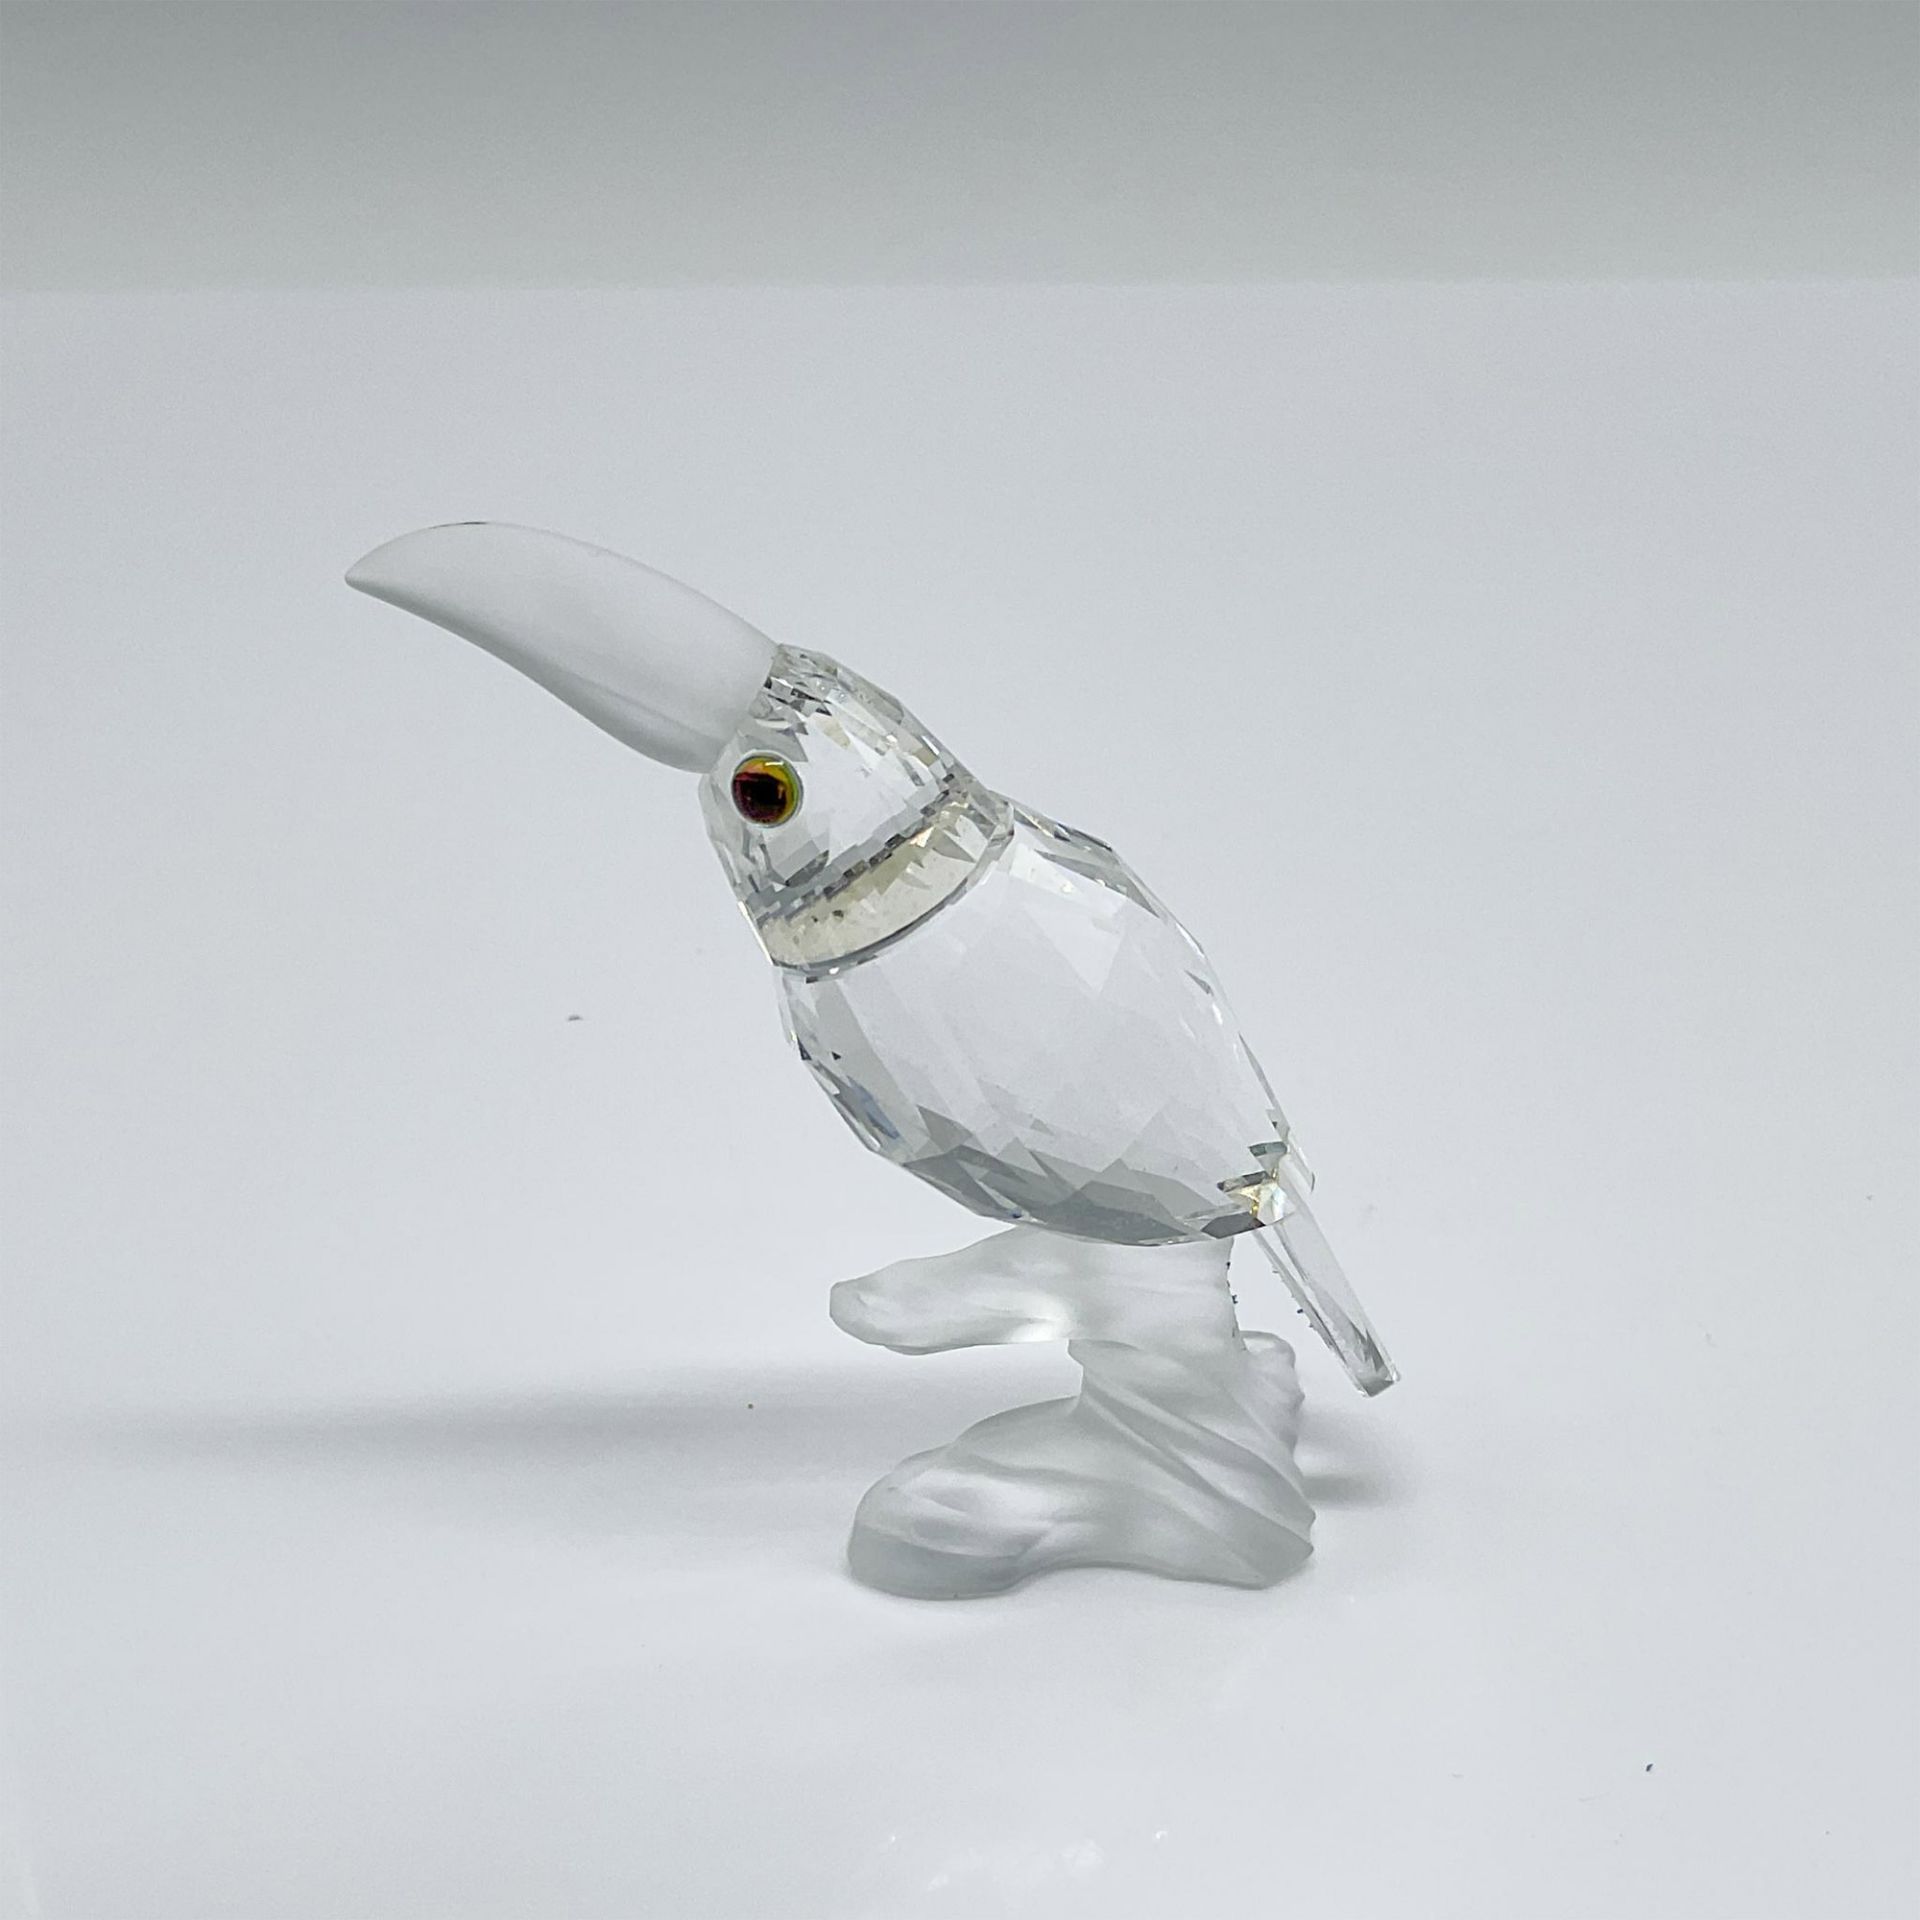 Swarovski Silver Crystal Figurine, Toucan Up in the Trees - Image 2 of 4